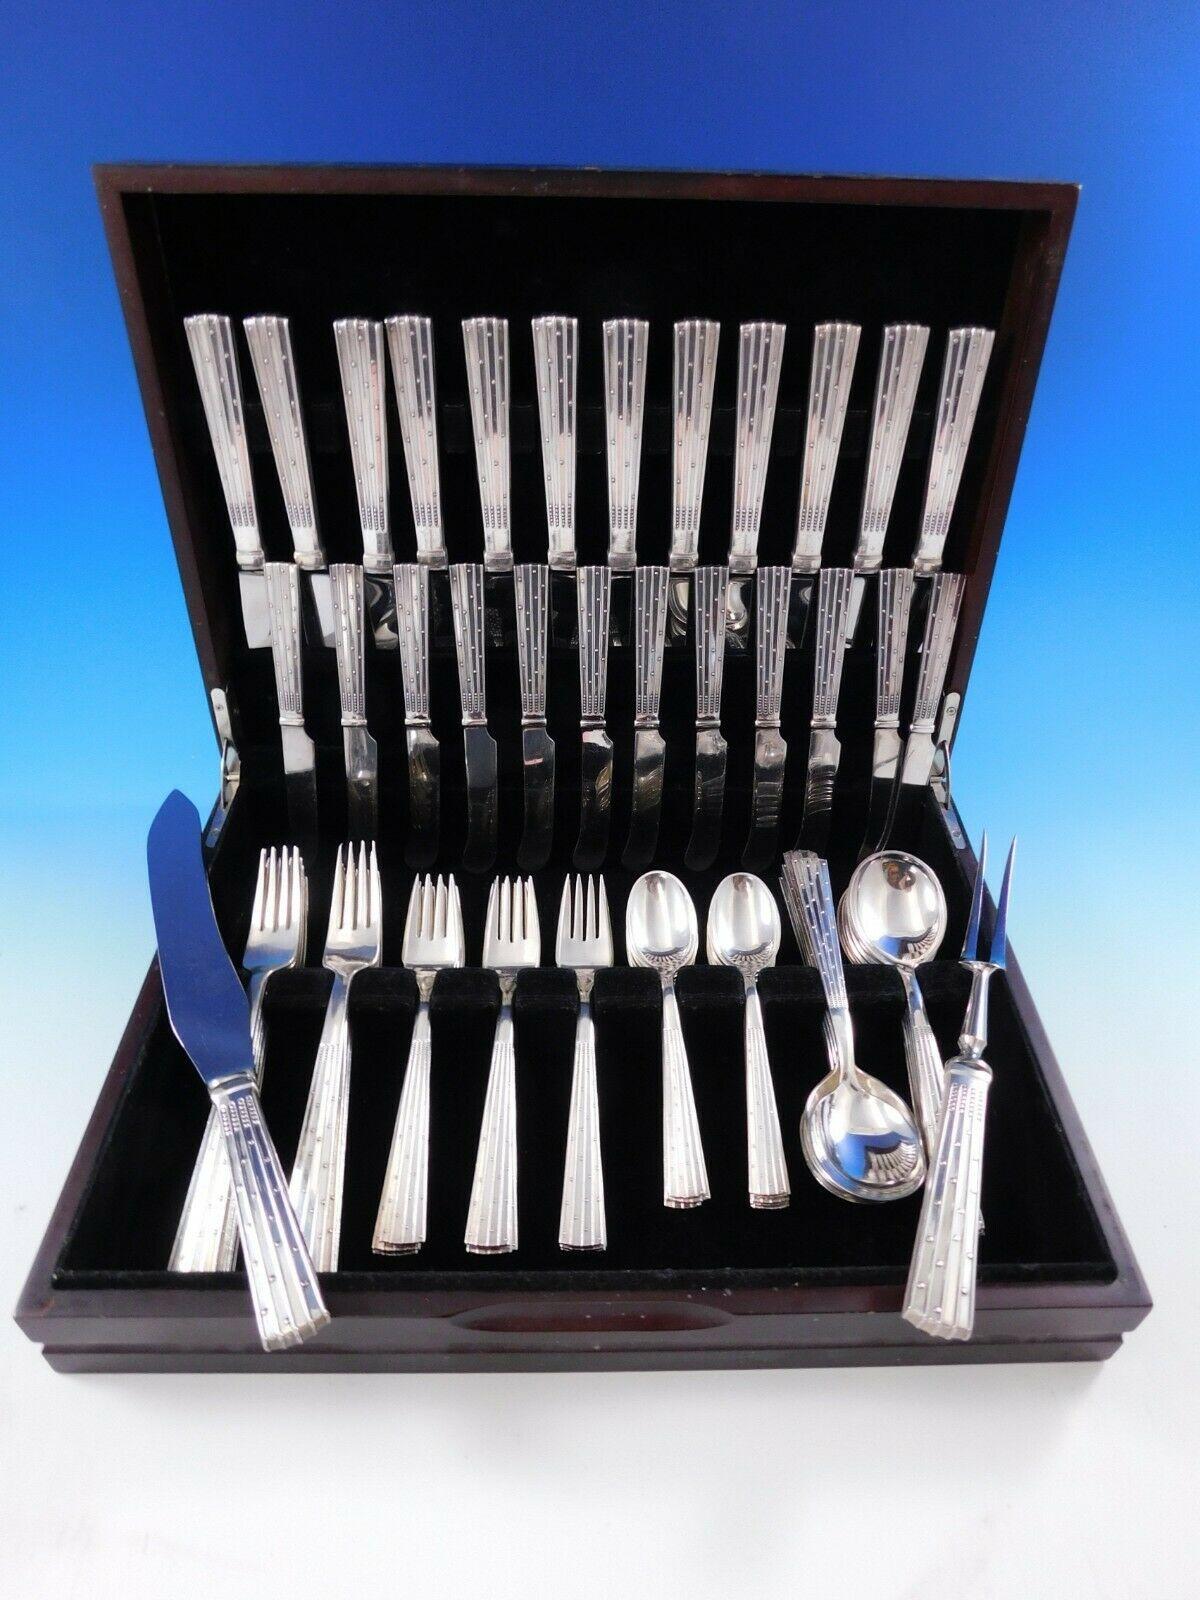 Mid-Century Modern Champagne by Mogensen Danish sterling silver Flatware set, 74 pieces. The handle design resembles modernist interpretation of a glass of champagne with tiny bubbles.
 
Renowned silversmith Mogensen was a silversmith in Denmark